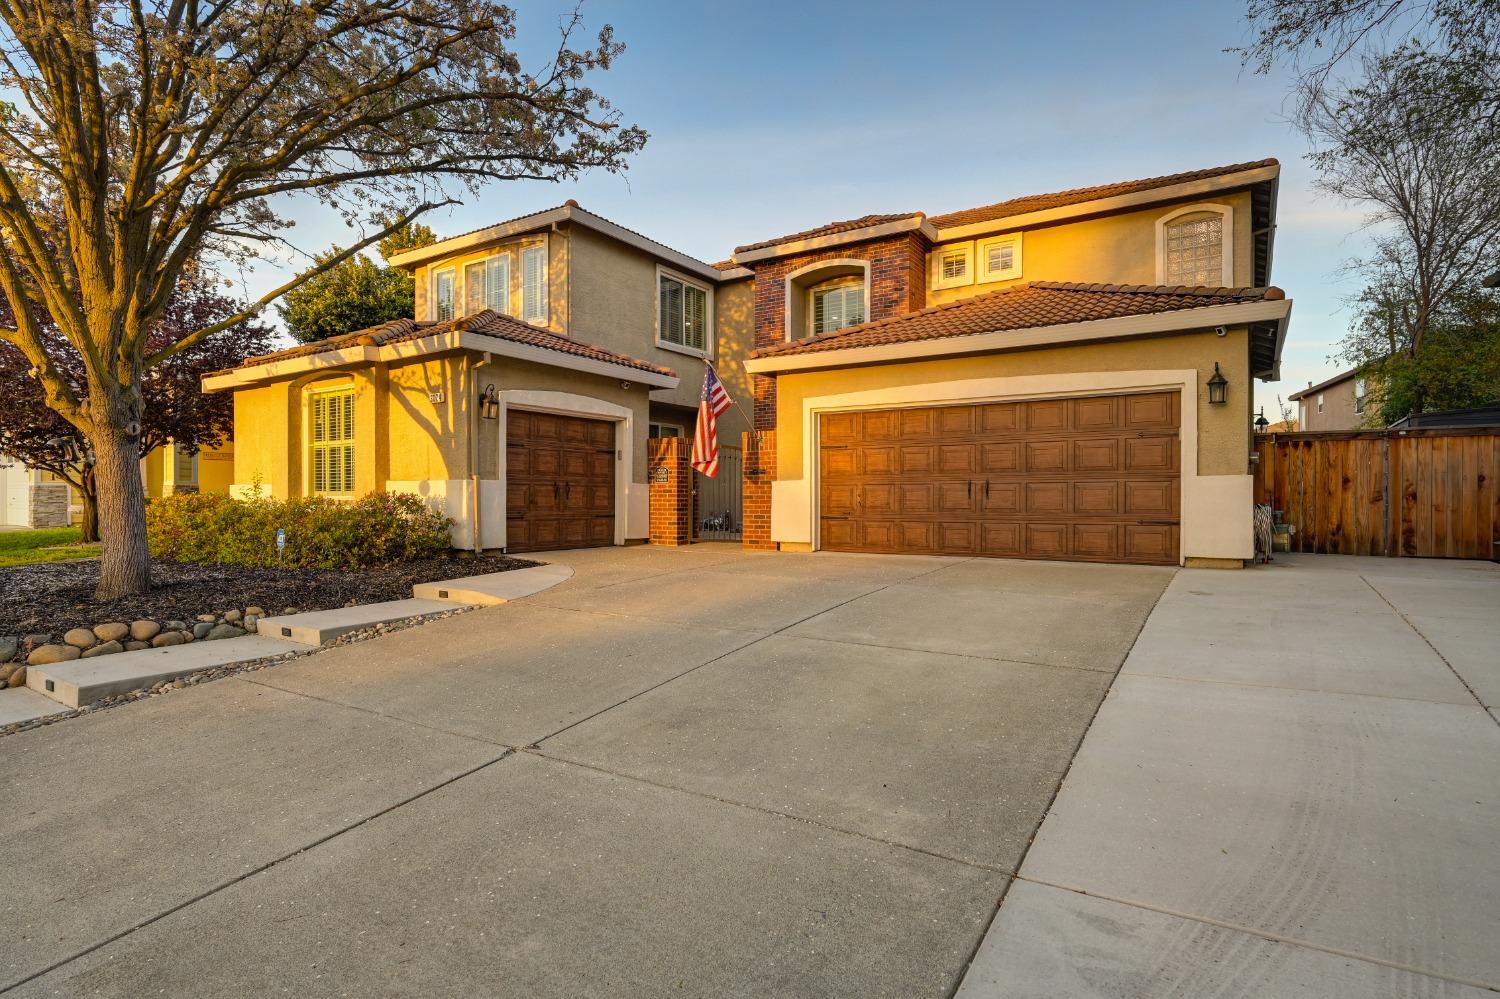 Photo of 3024 Mammoth Dr in Roseville, CA